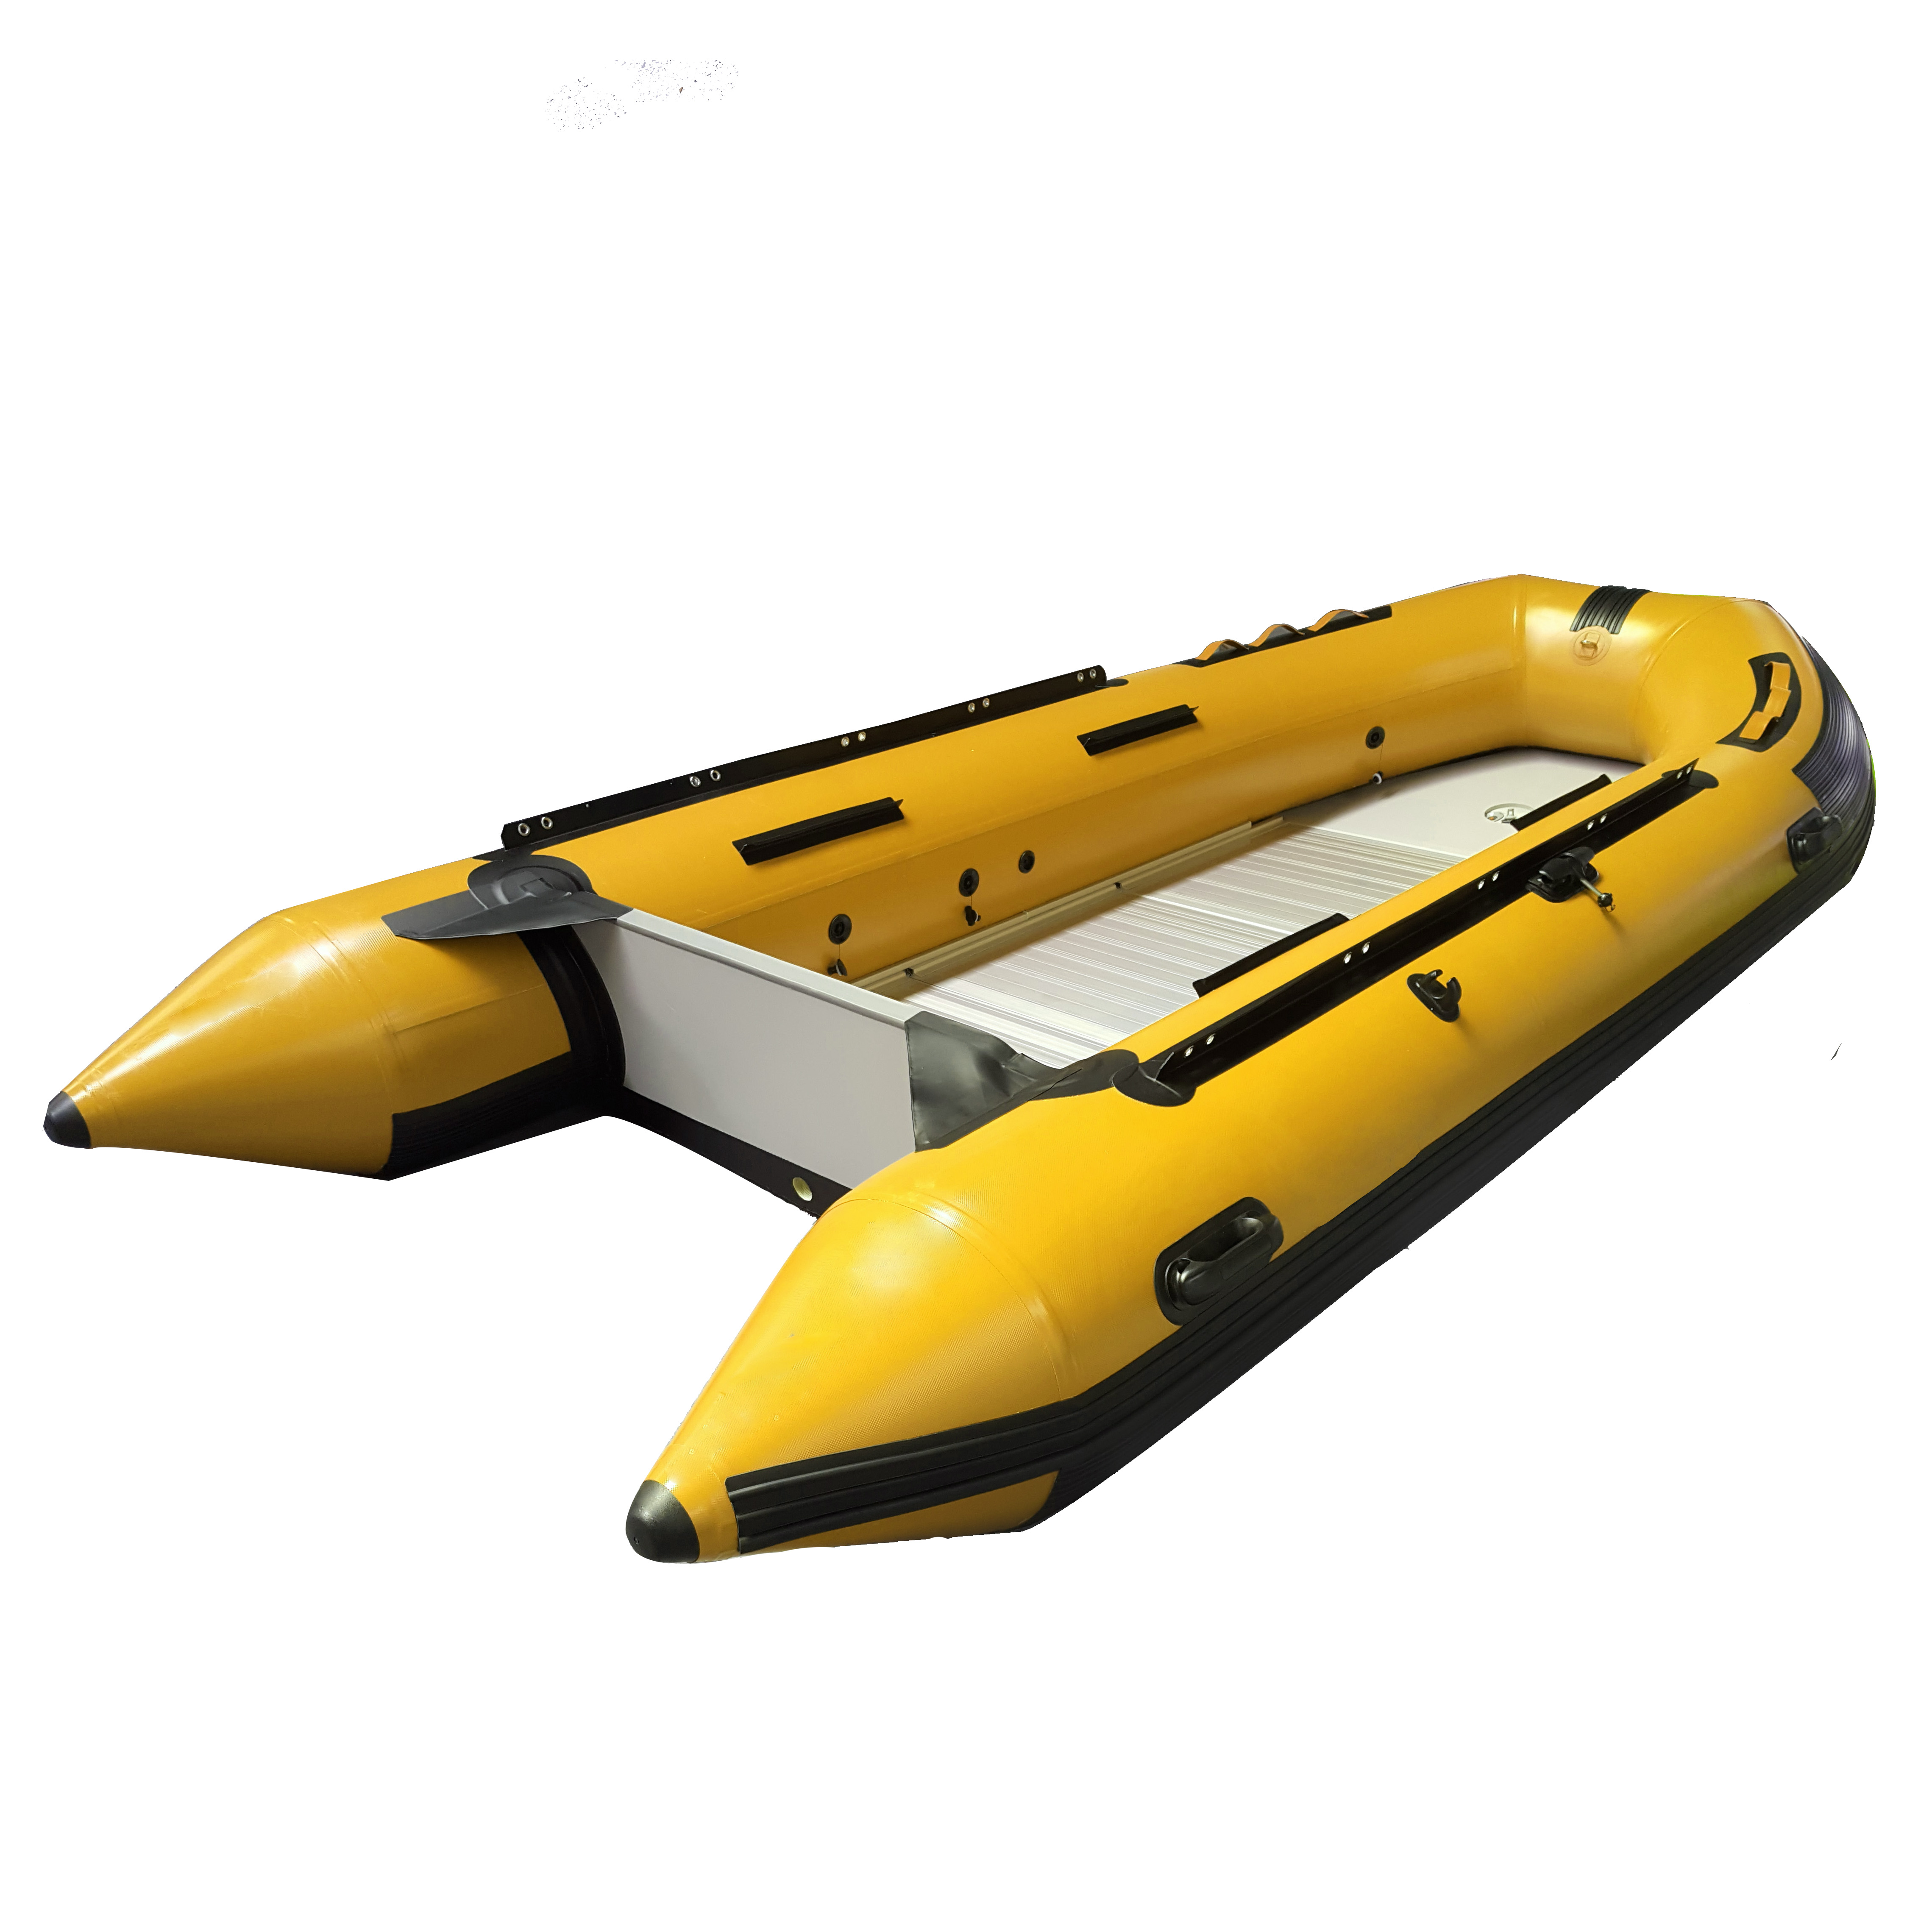 DeporteStar 2019 HZX-HY 550 Inflatable Boat 